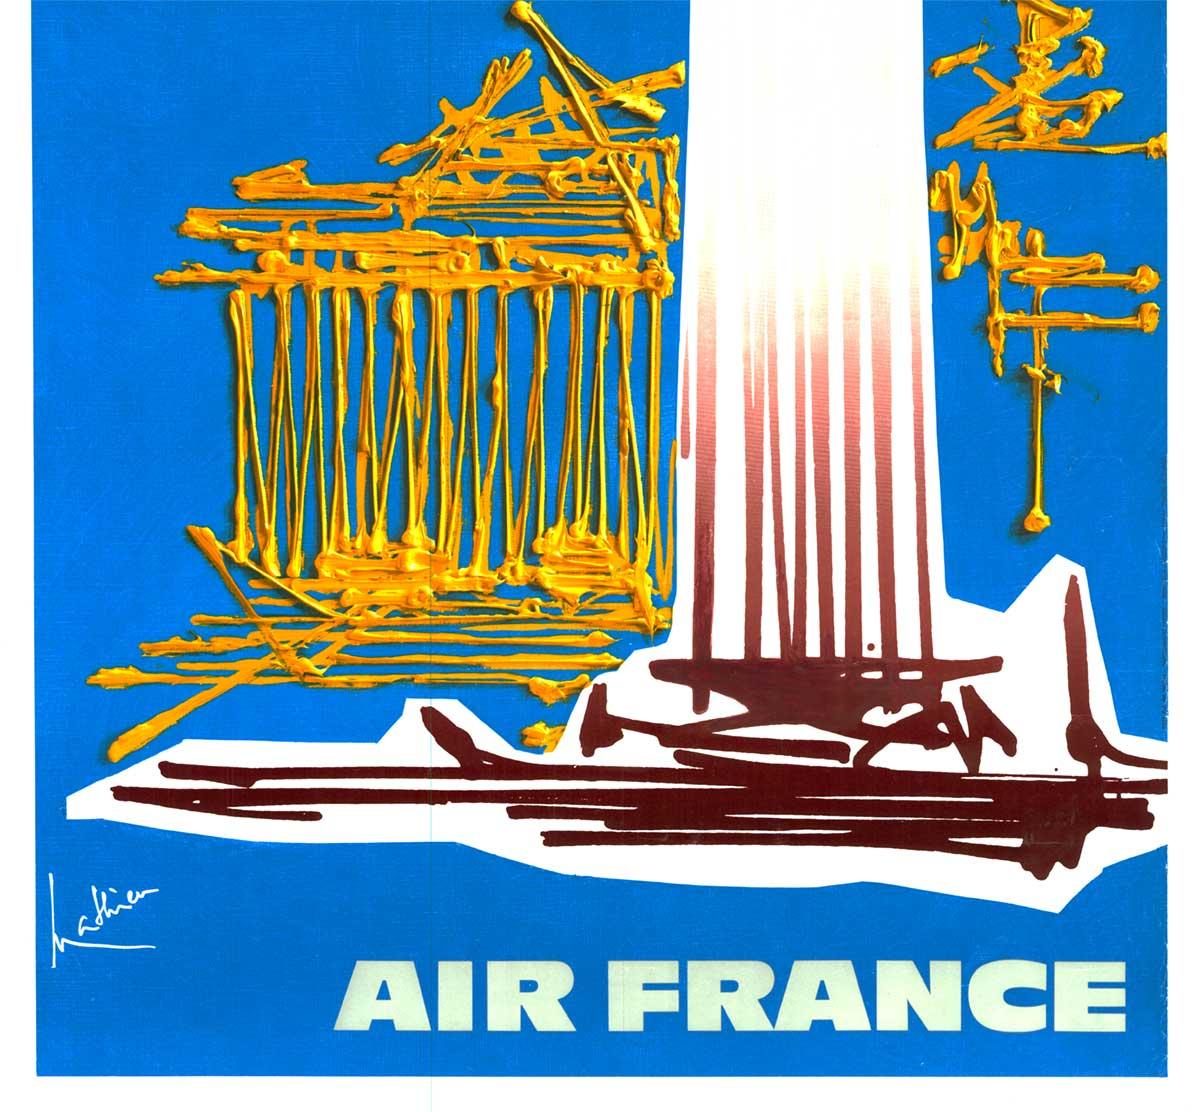 Original Air France Greece (Grece) vintage travel poster - Abstract Print by Georges Mathieu